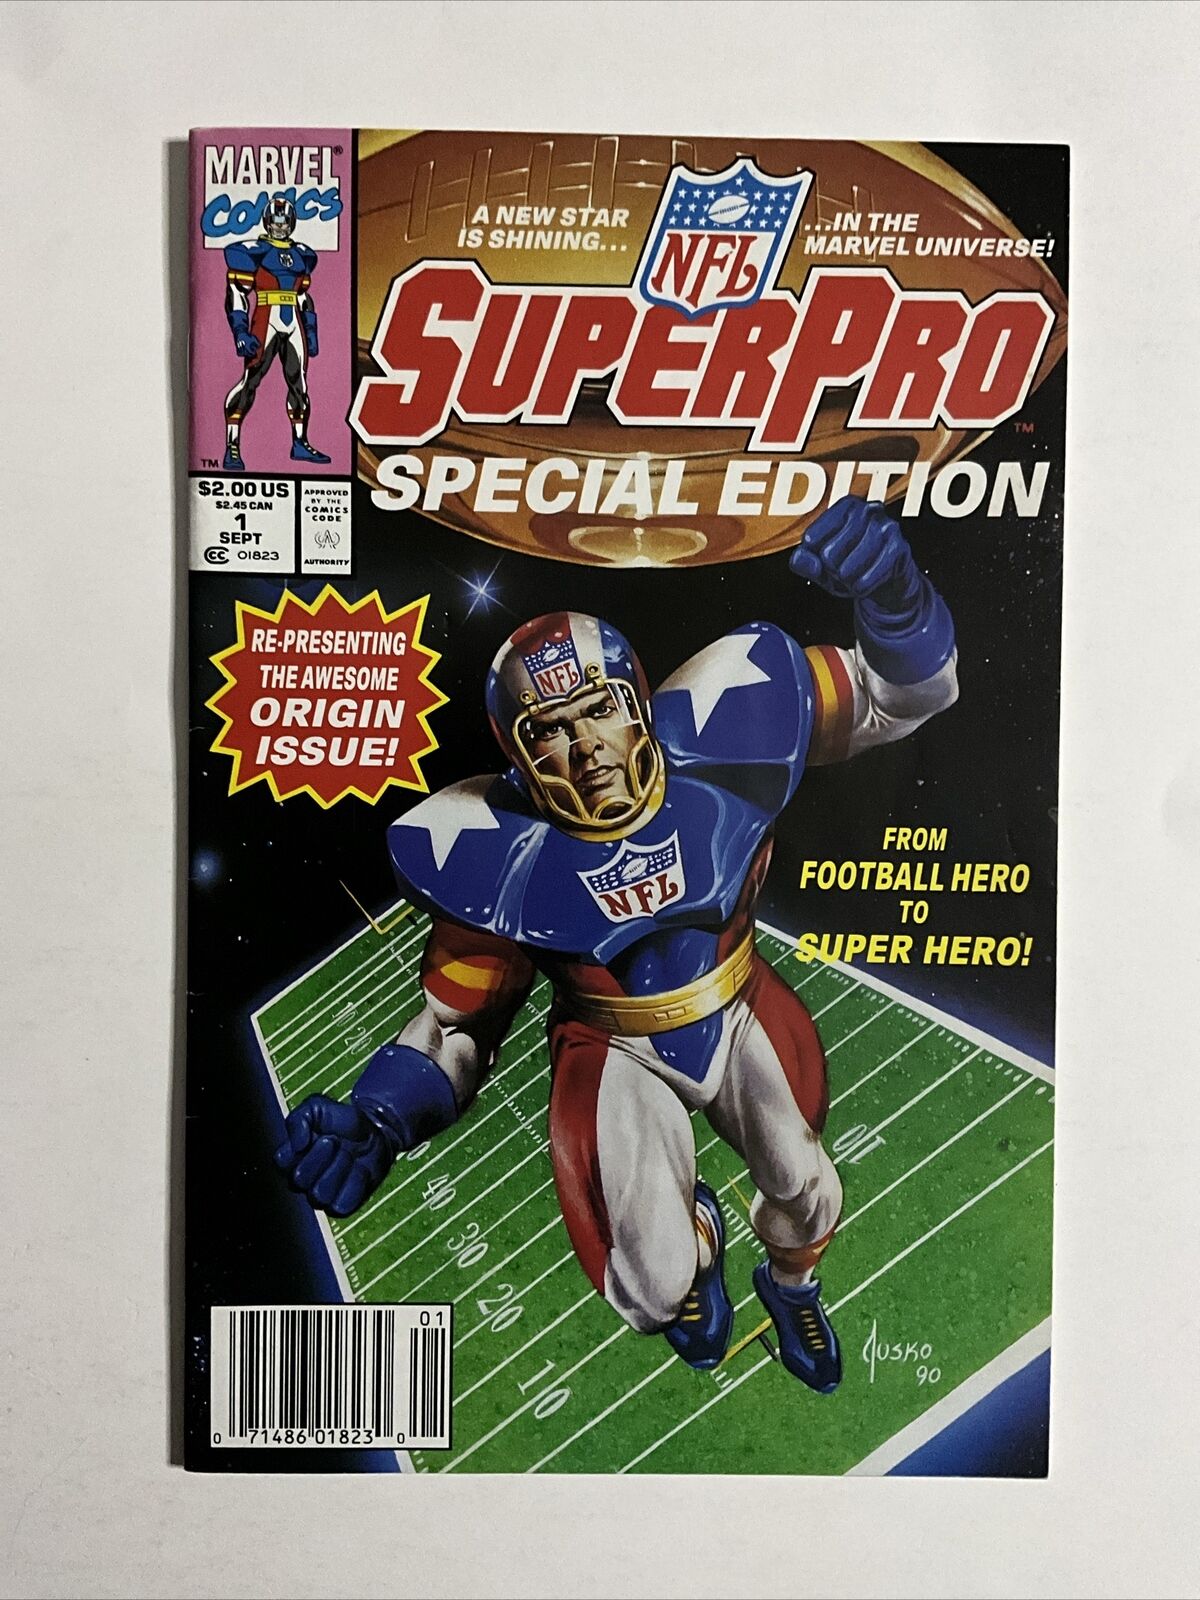 NFL Super Pro Special Edition #1 (1991) 8.5 VF Marvel Newsstand Edition Comic